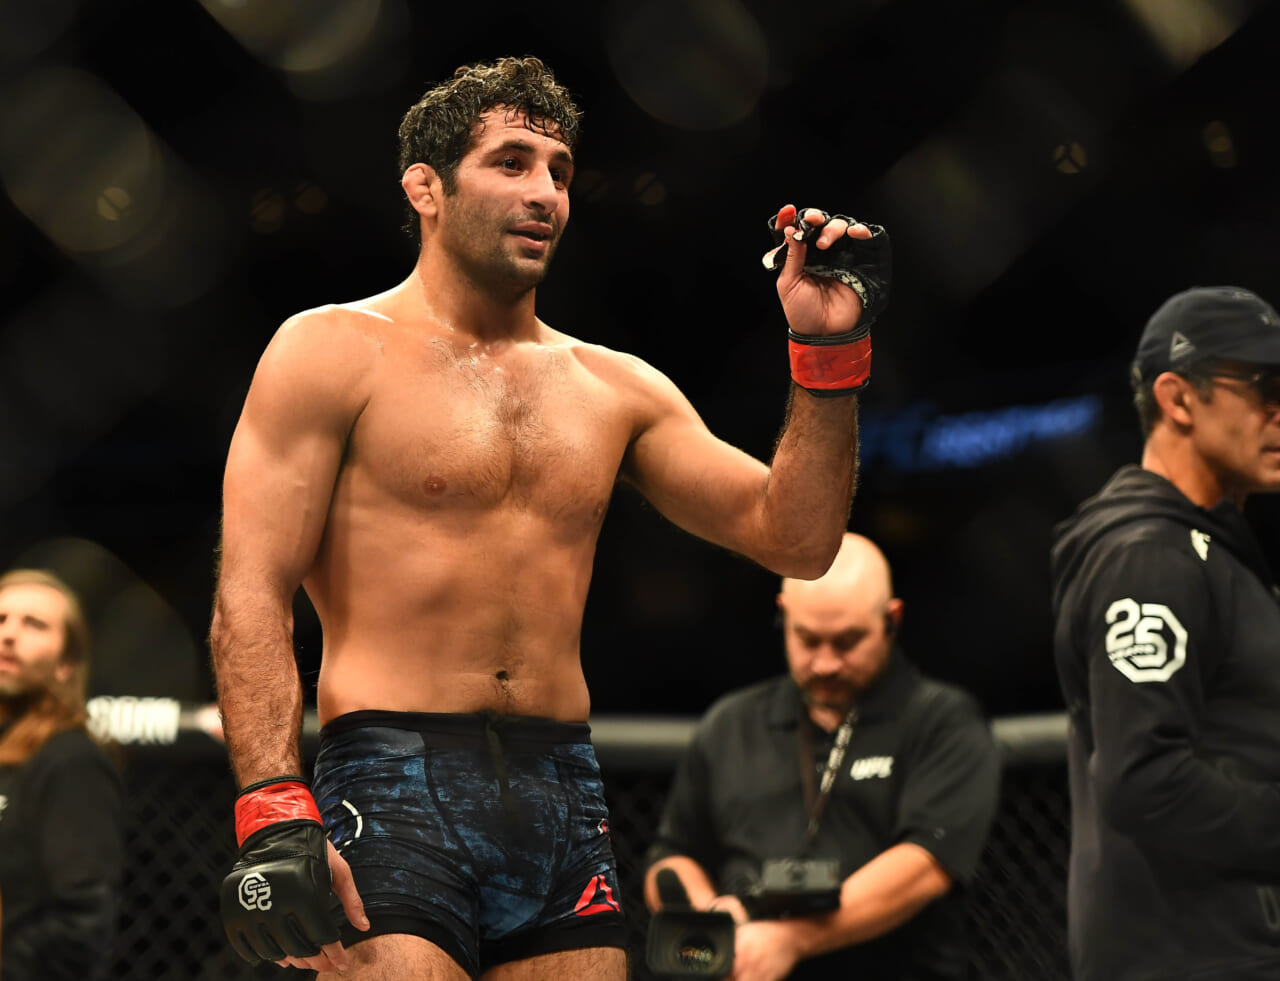 Beneil Dariush wants to clean out the UFC’s lightweight division